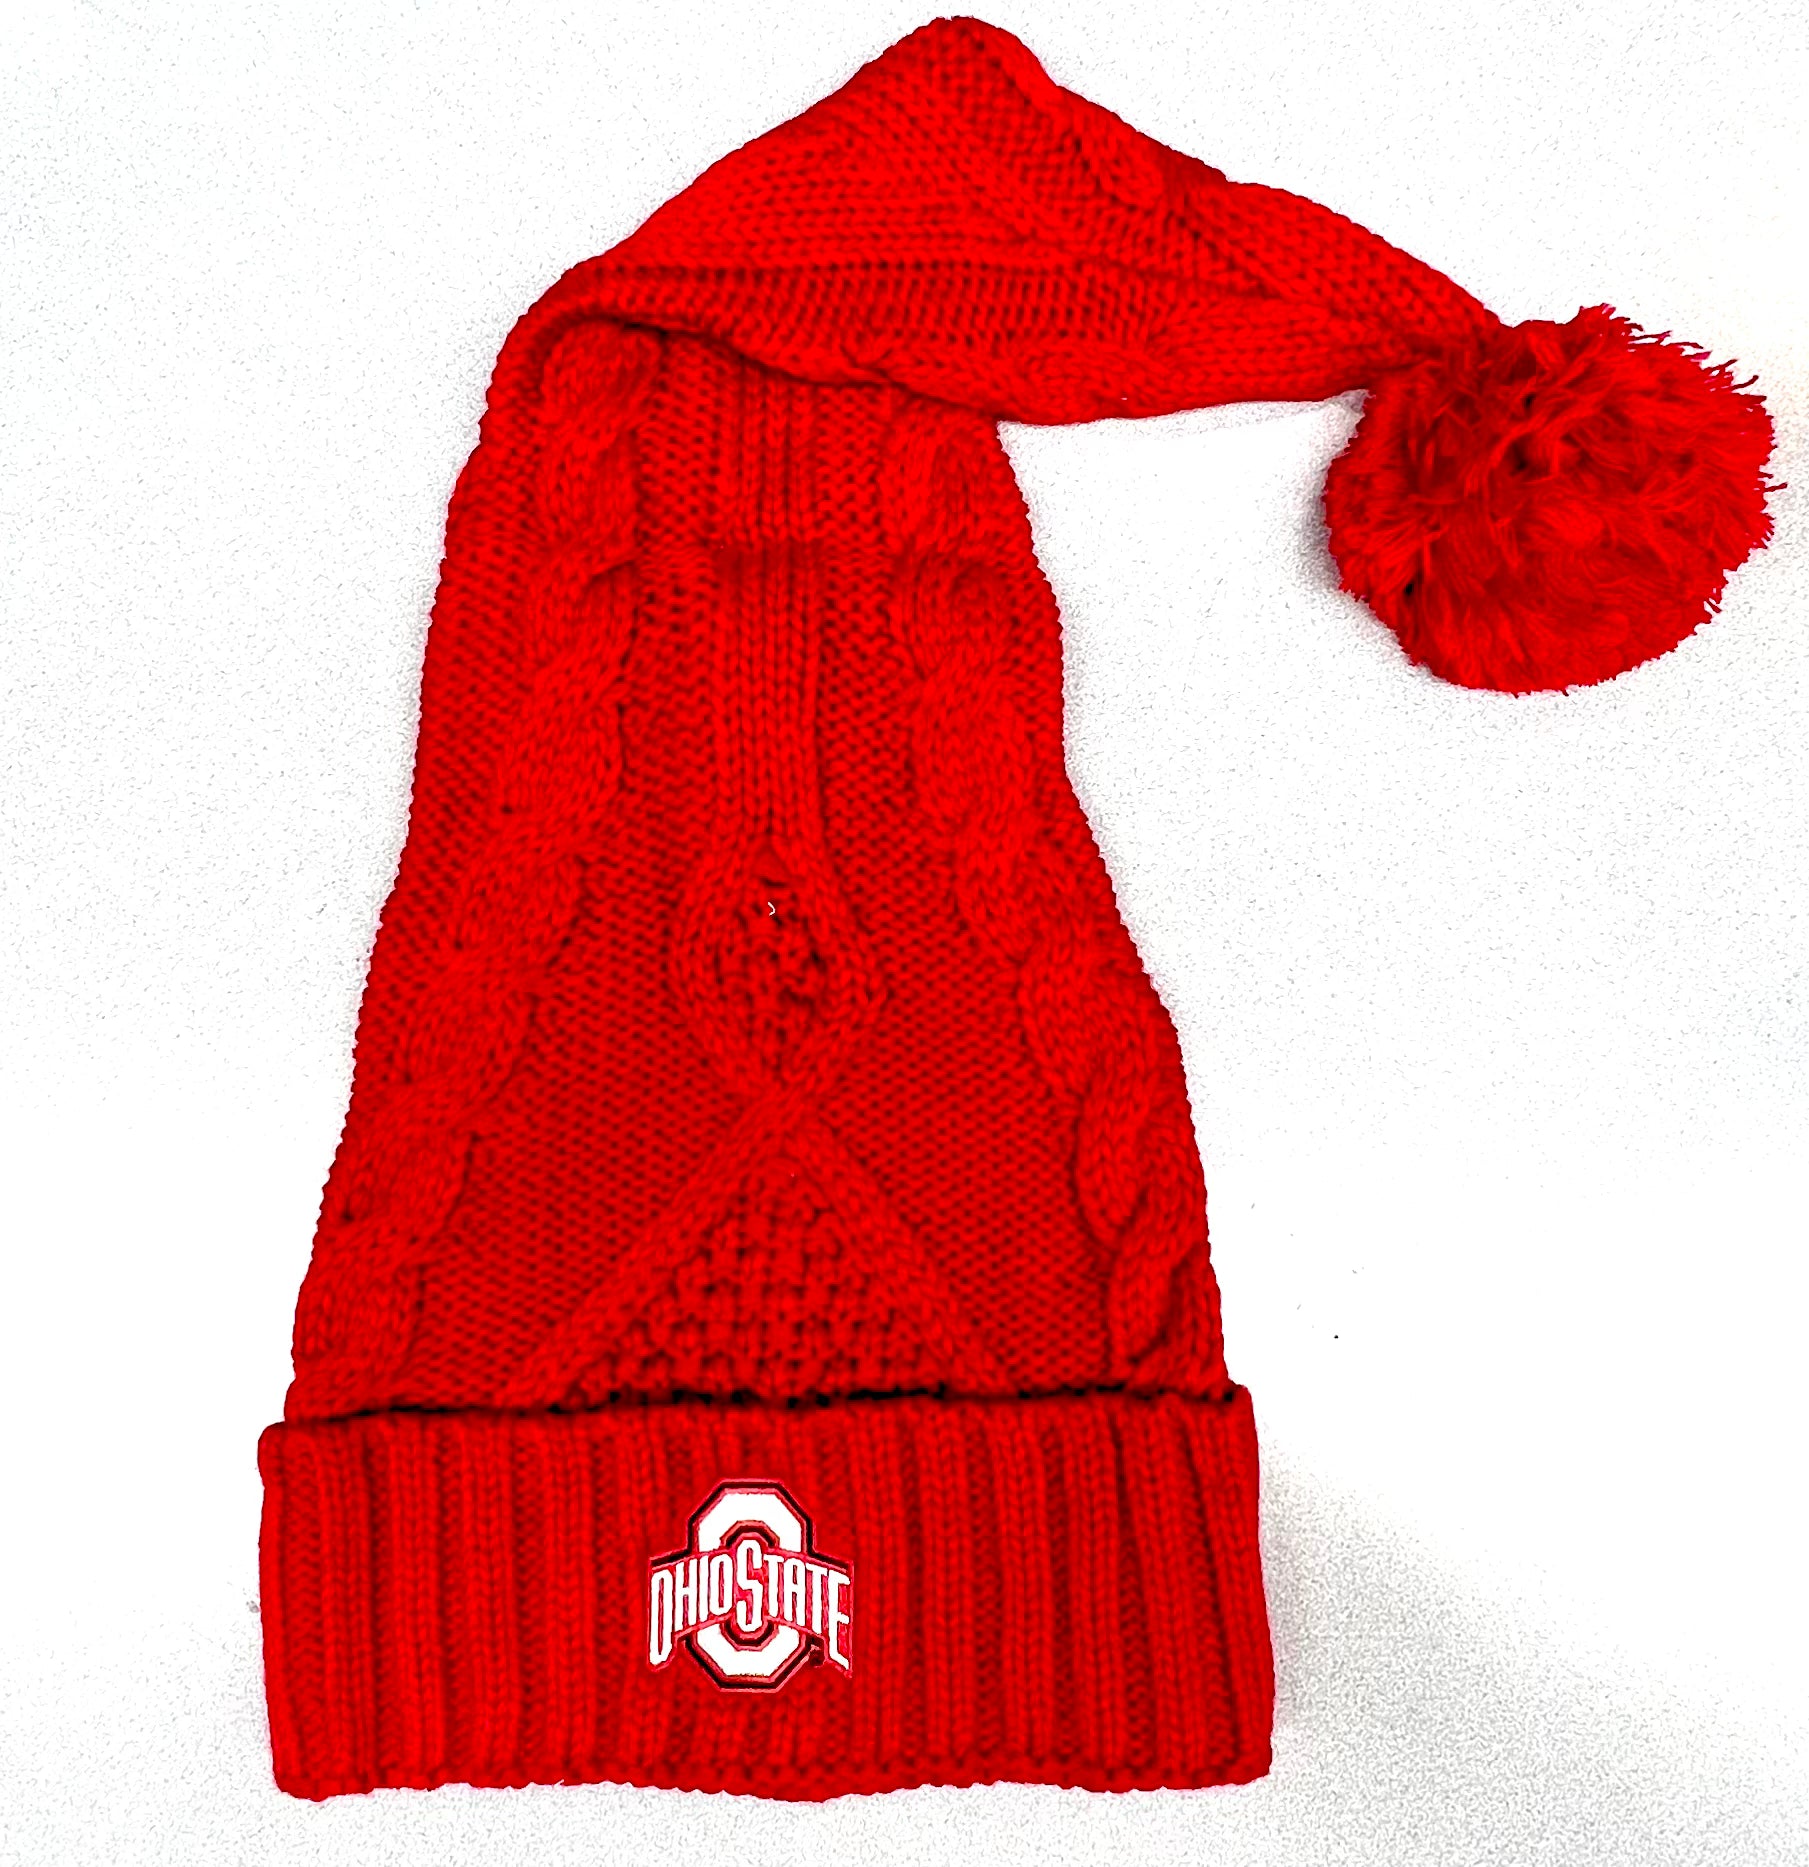 HOLIDAY RED KNIT SANTA CAP WITH OHIO STATE LOGO